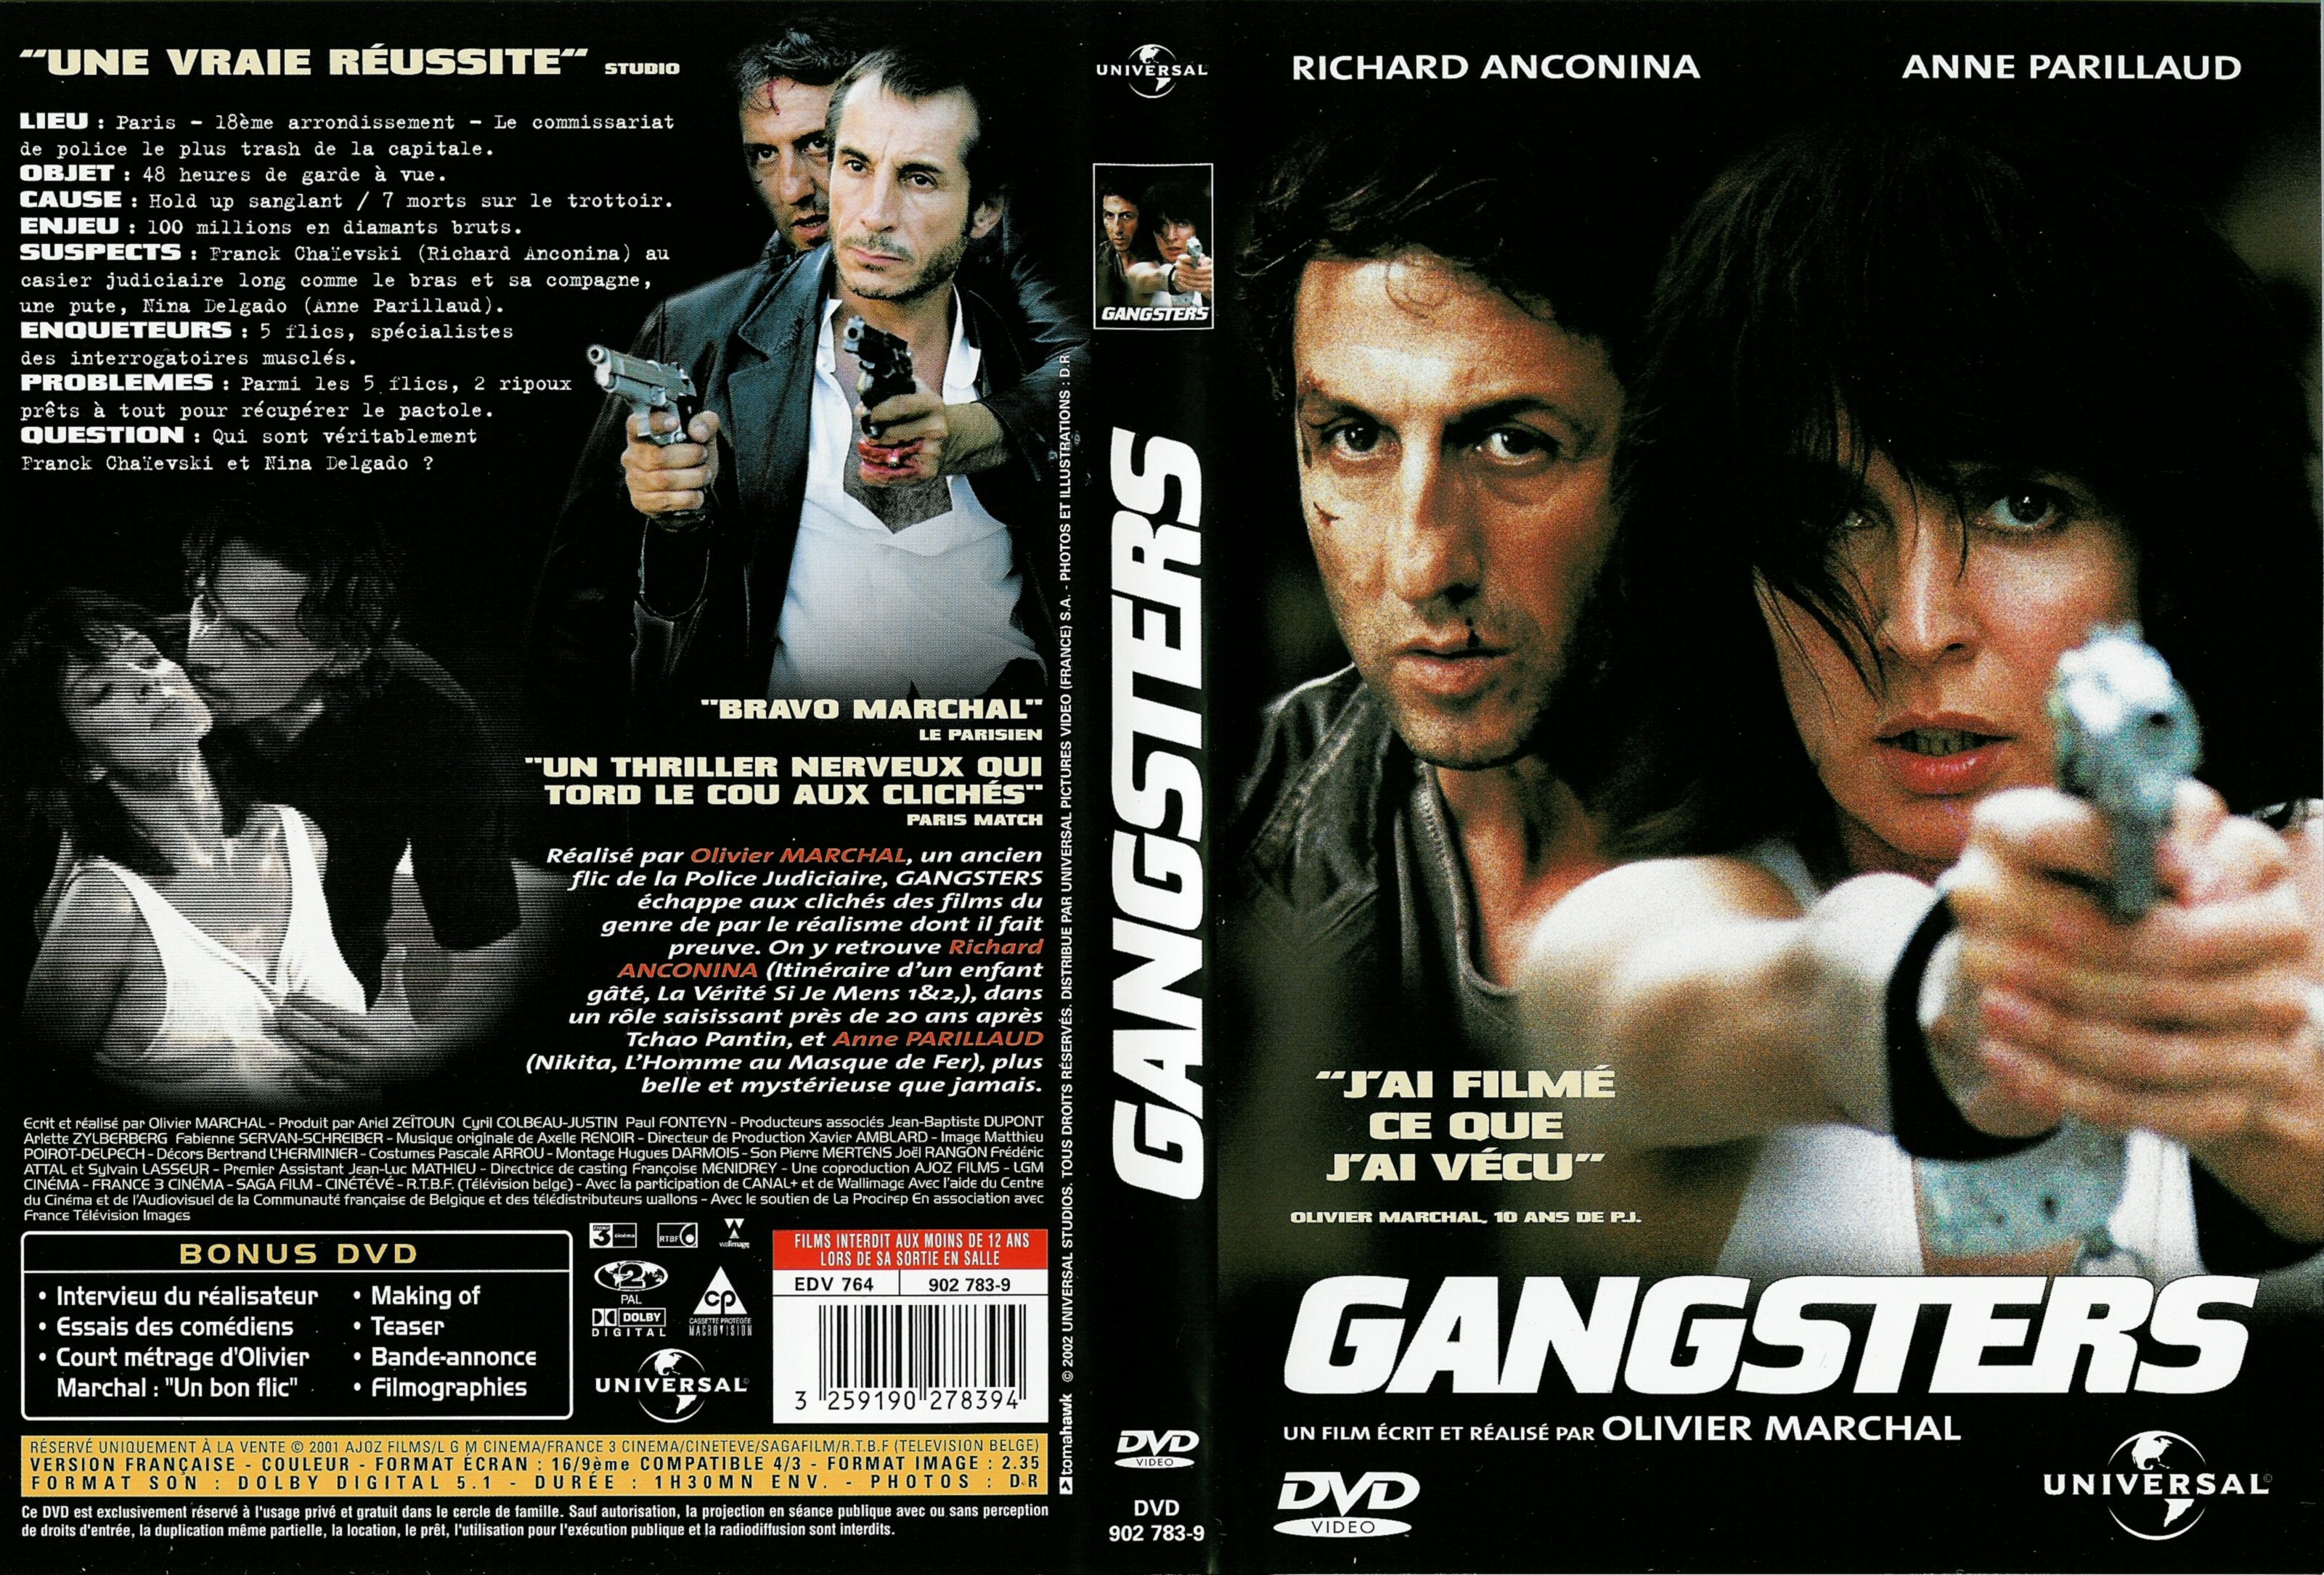 Jaquette DVD Gangsters